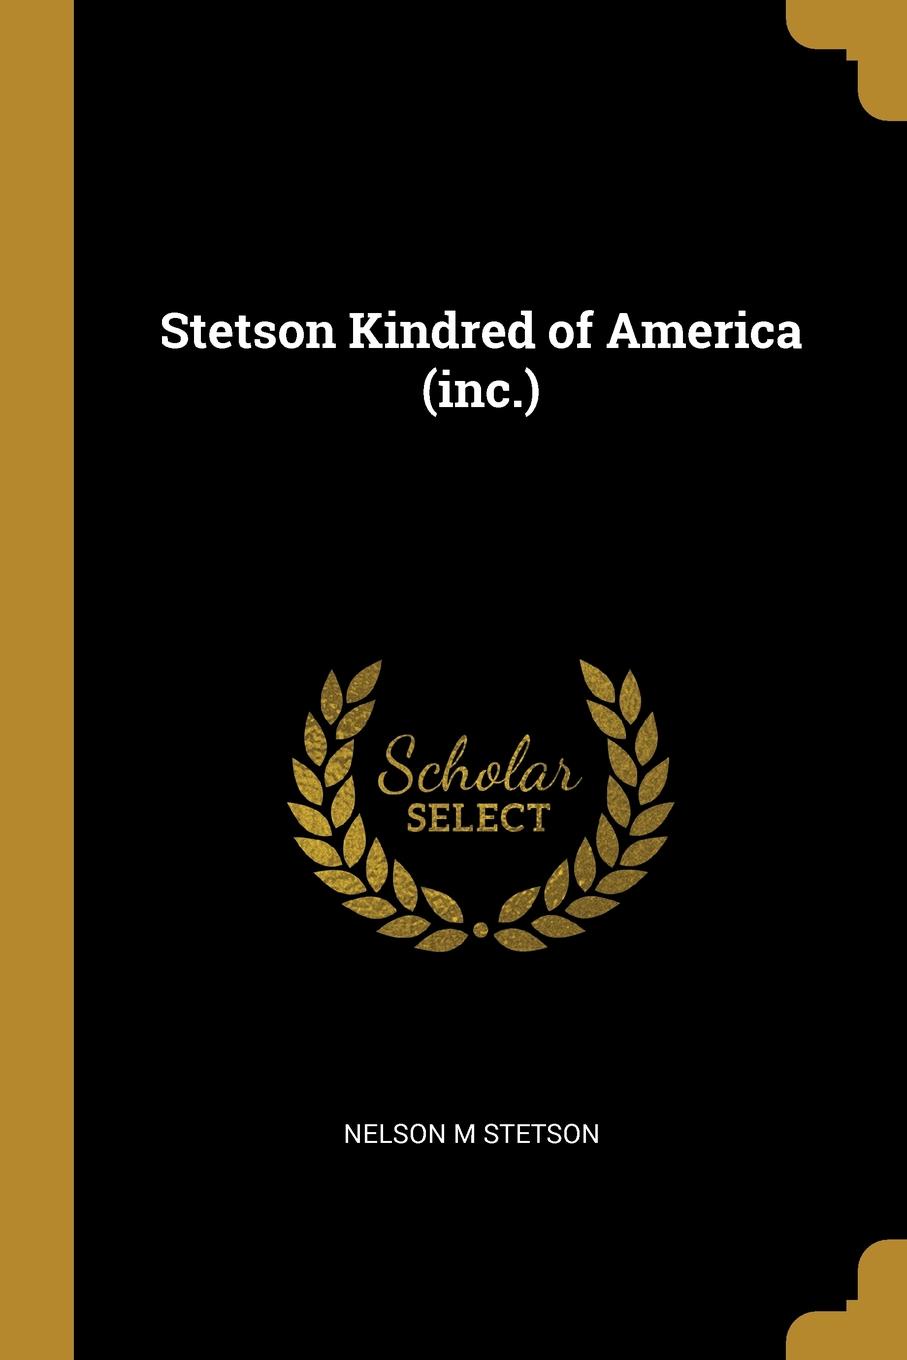 Stetson Kindred of America (inc.)